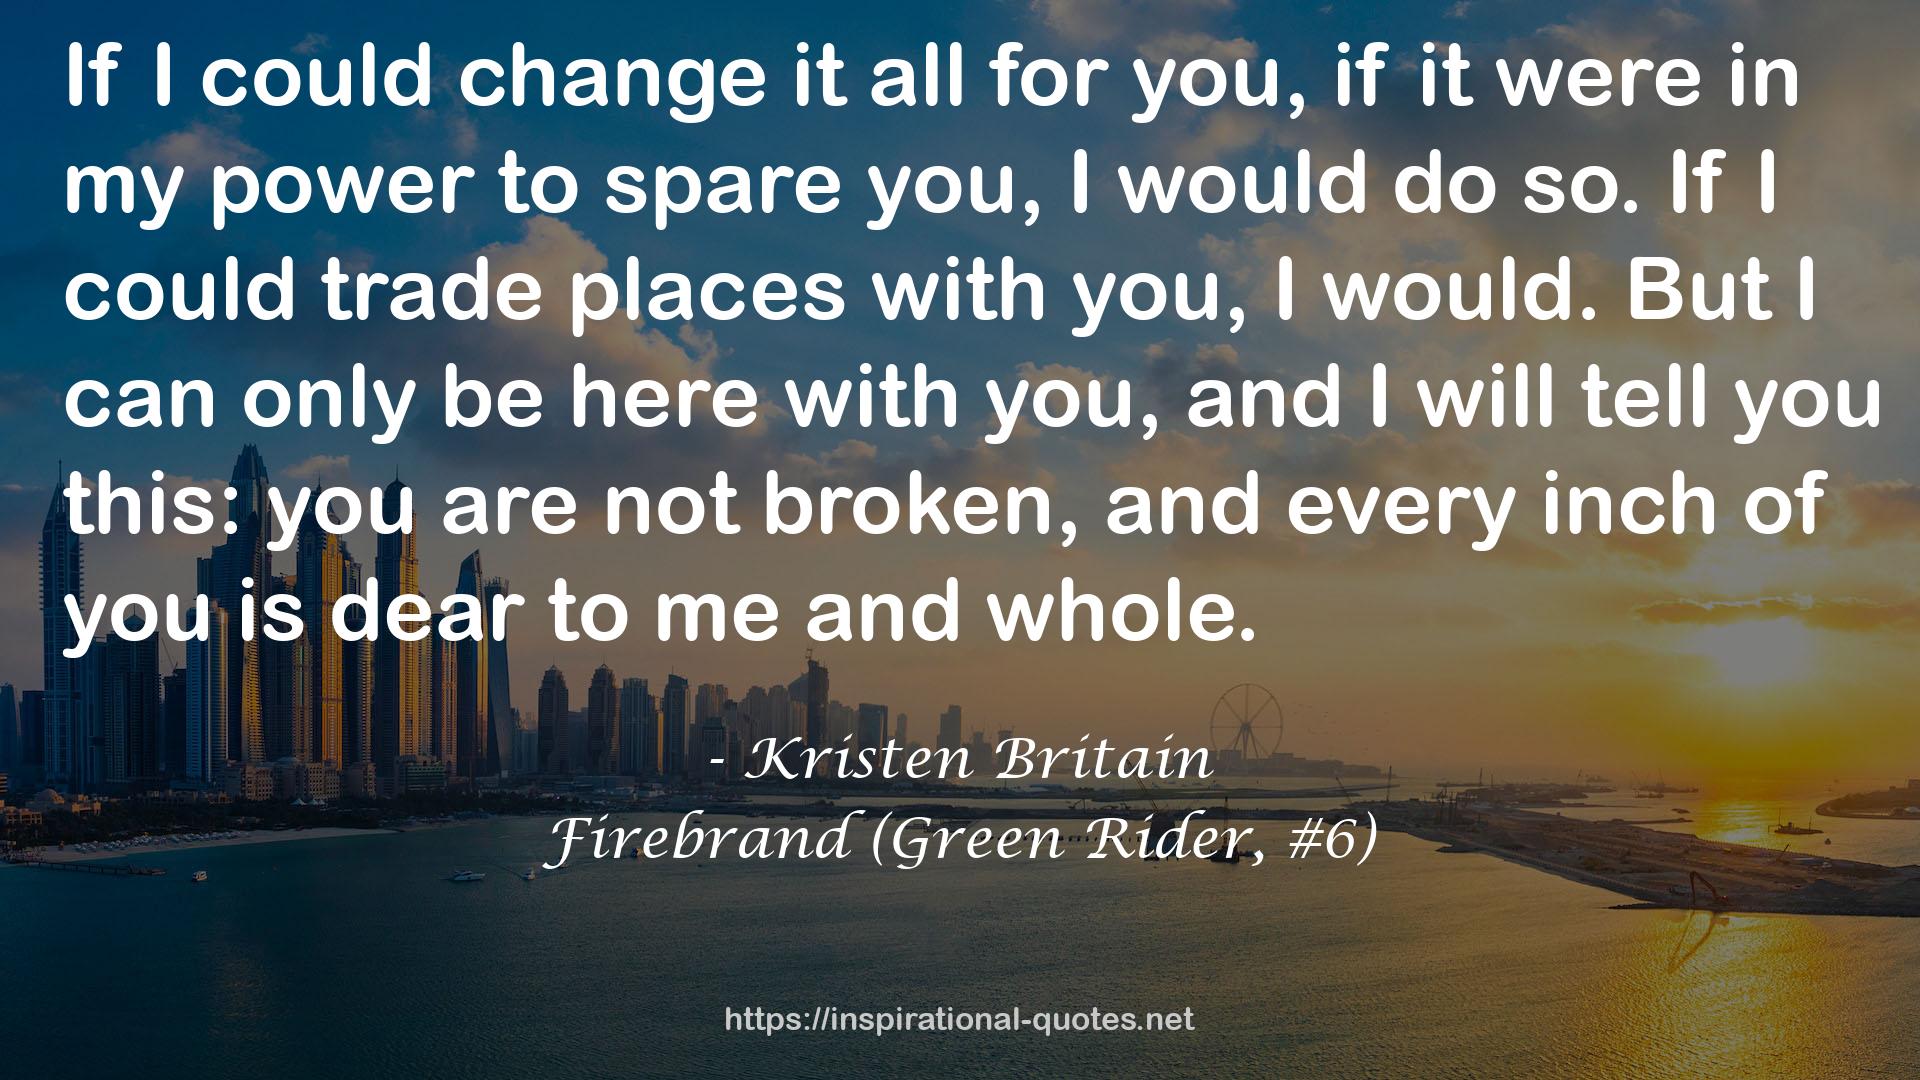 Firebrand (Green Rider, #6) QUOTES